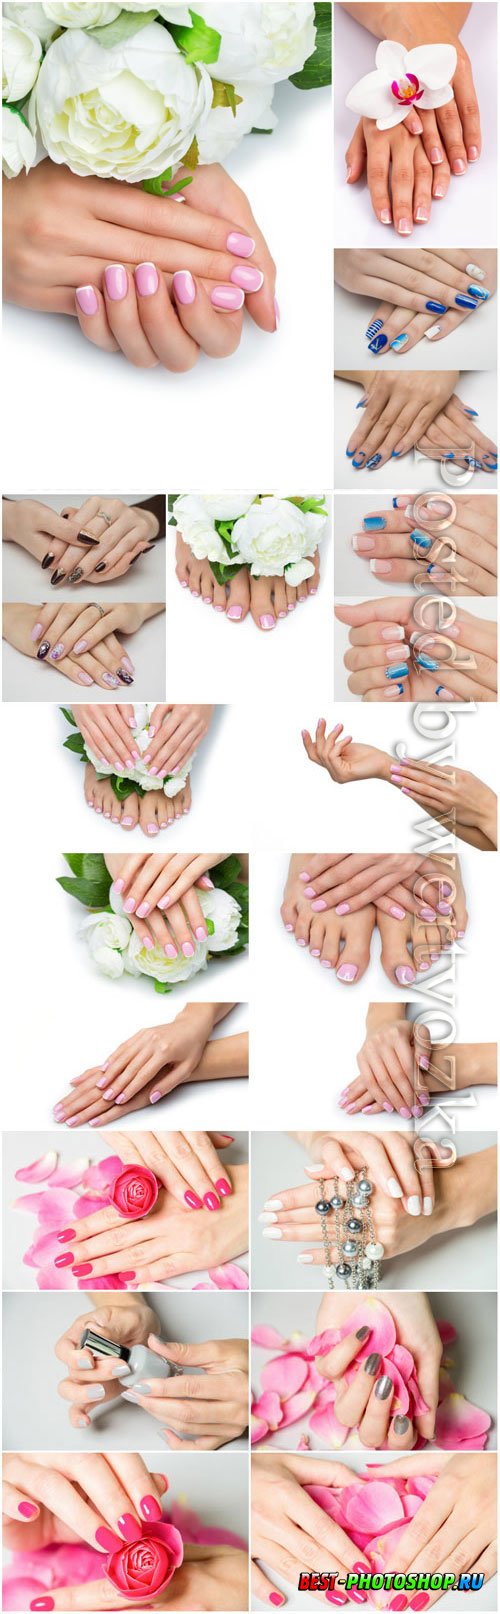 Pedicure and manicure, beautiful handles with flowers stock photo